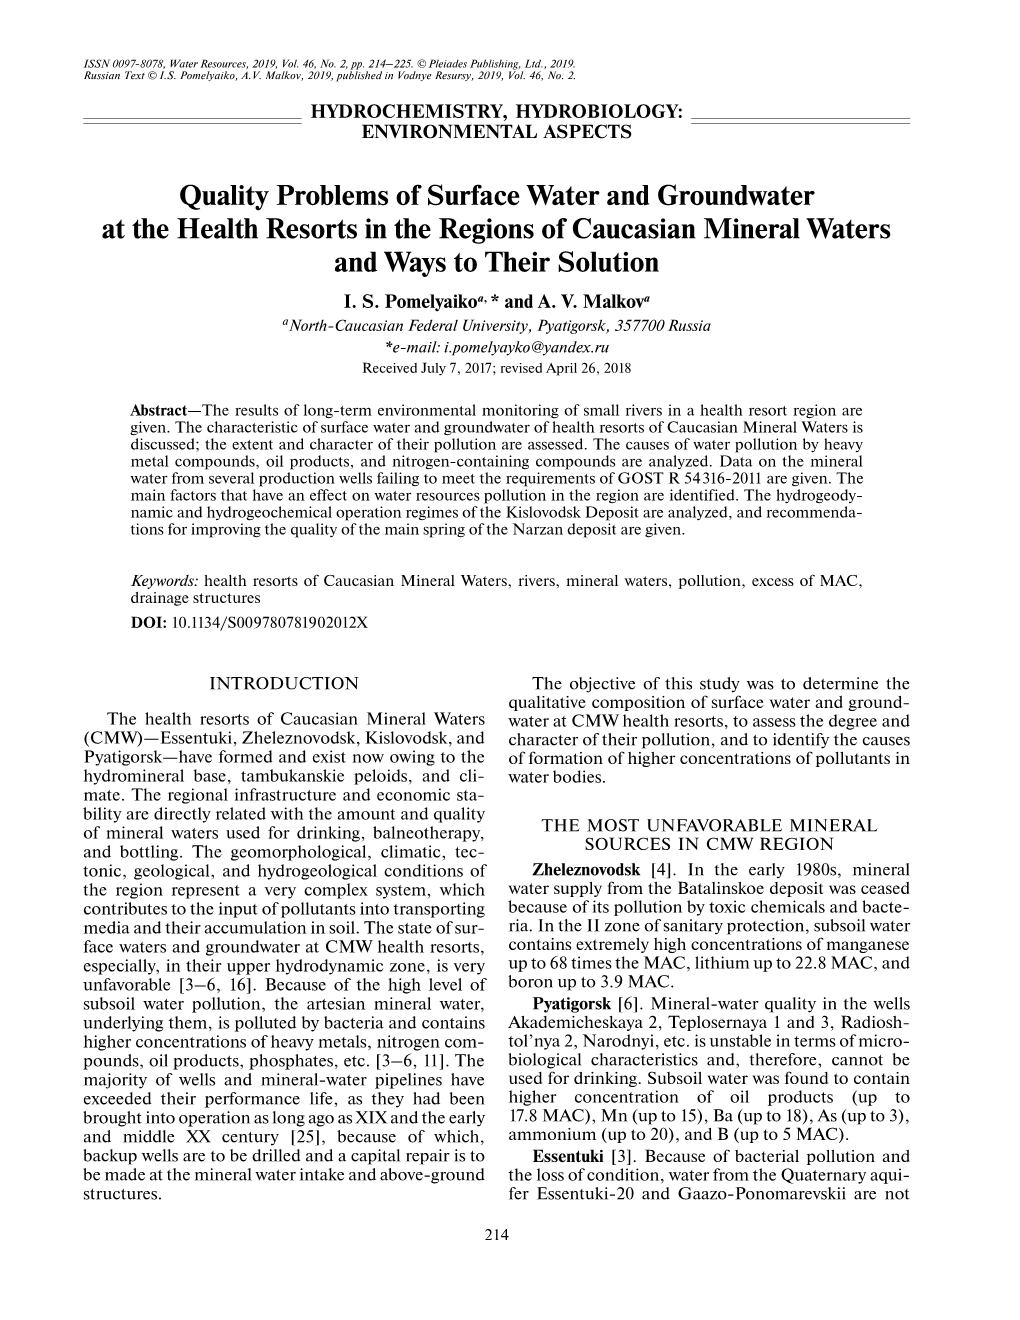 Quality Problems of Surface Water and Groundwater at the Health Resorts in the Regions of Caucasian Mineral Waters and Ways to Their Solution I